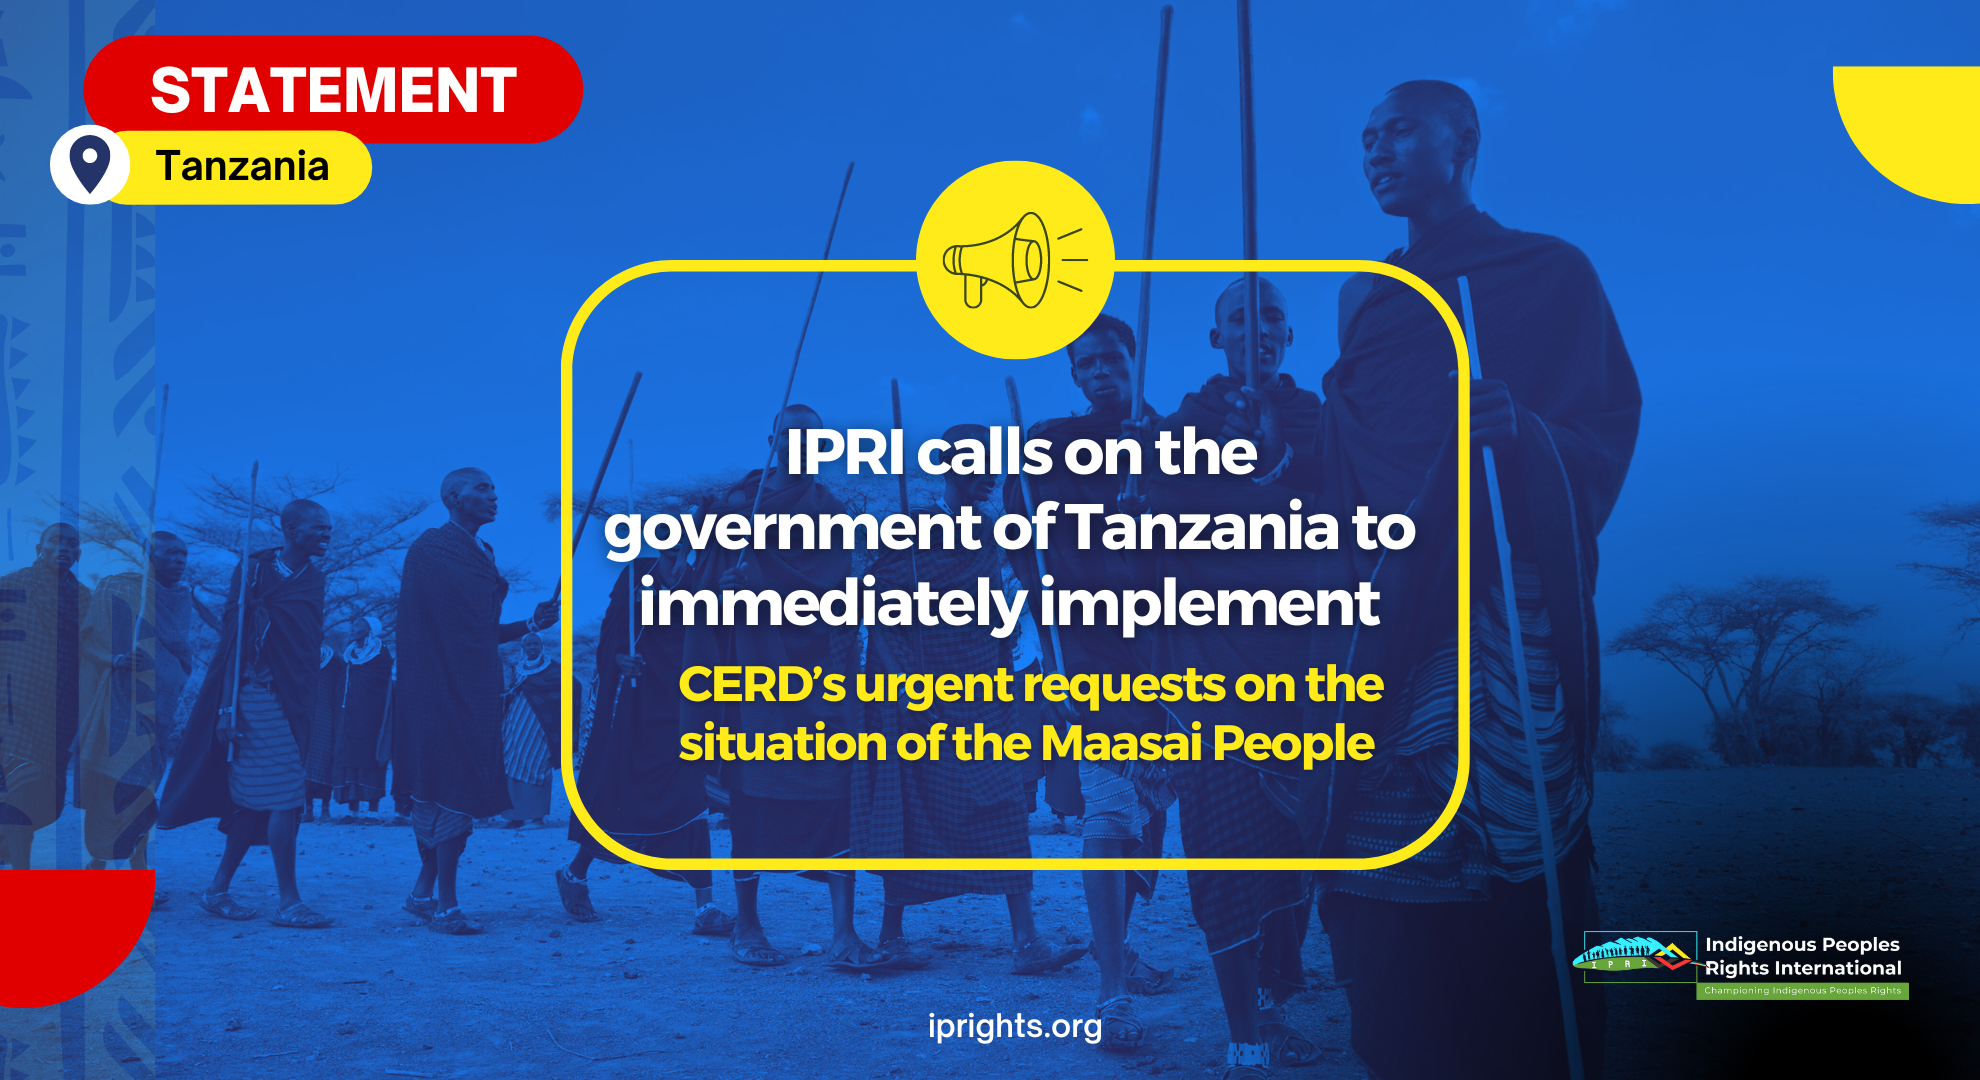 IPRI calls on the government of Tanzania to immediately implement CERD’s urgent requests  on the situation of the Maasai People